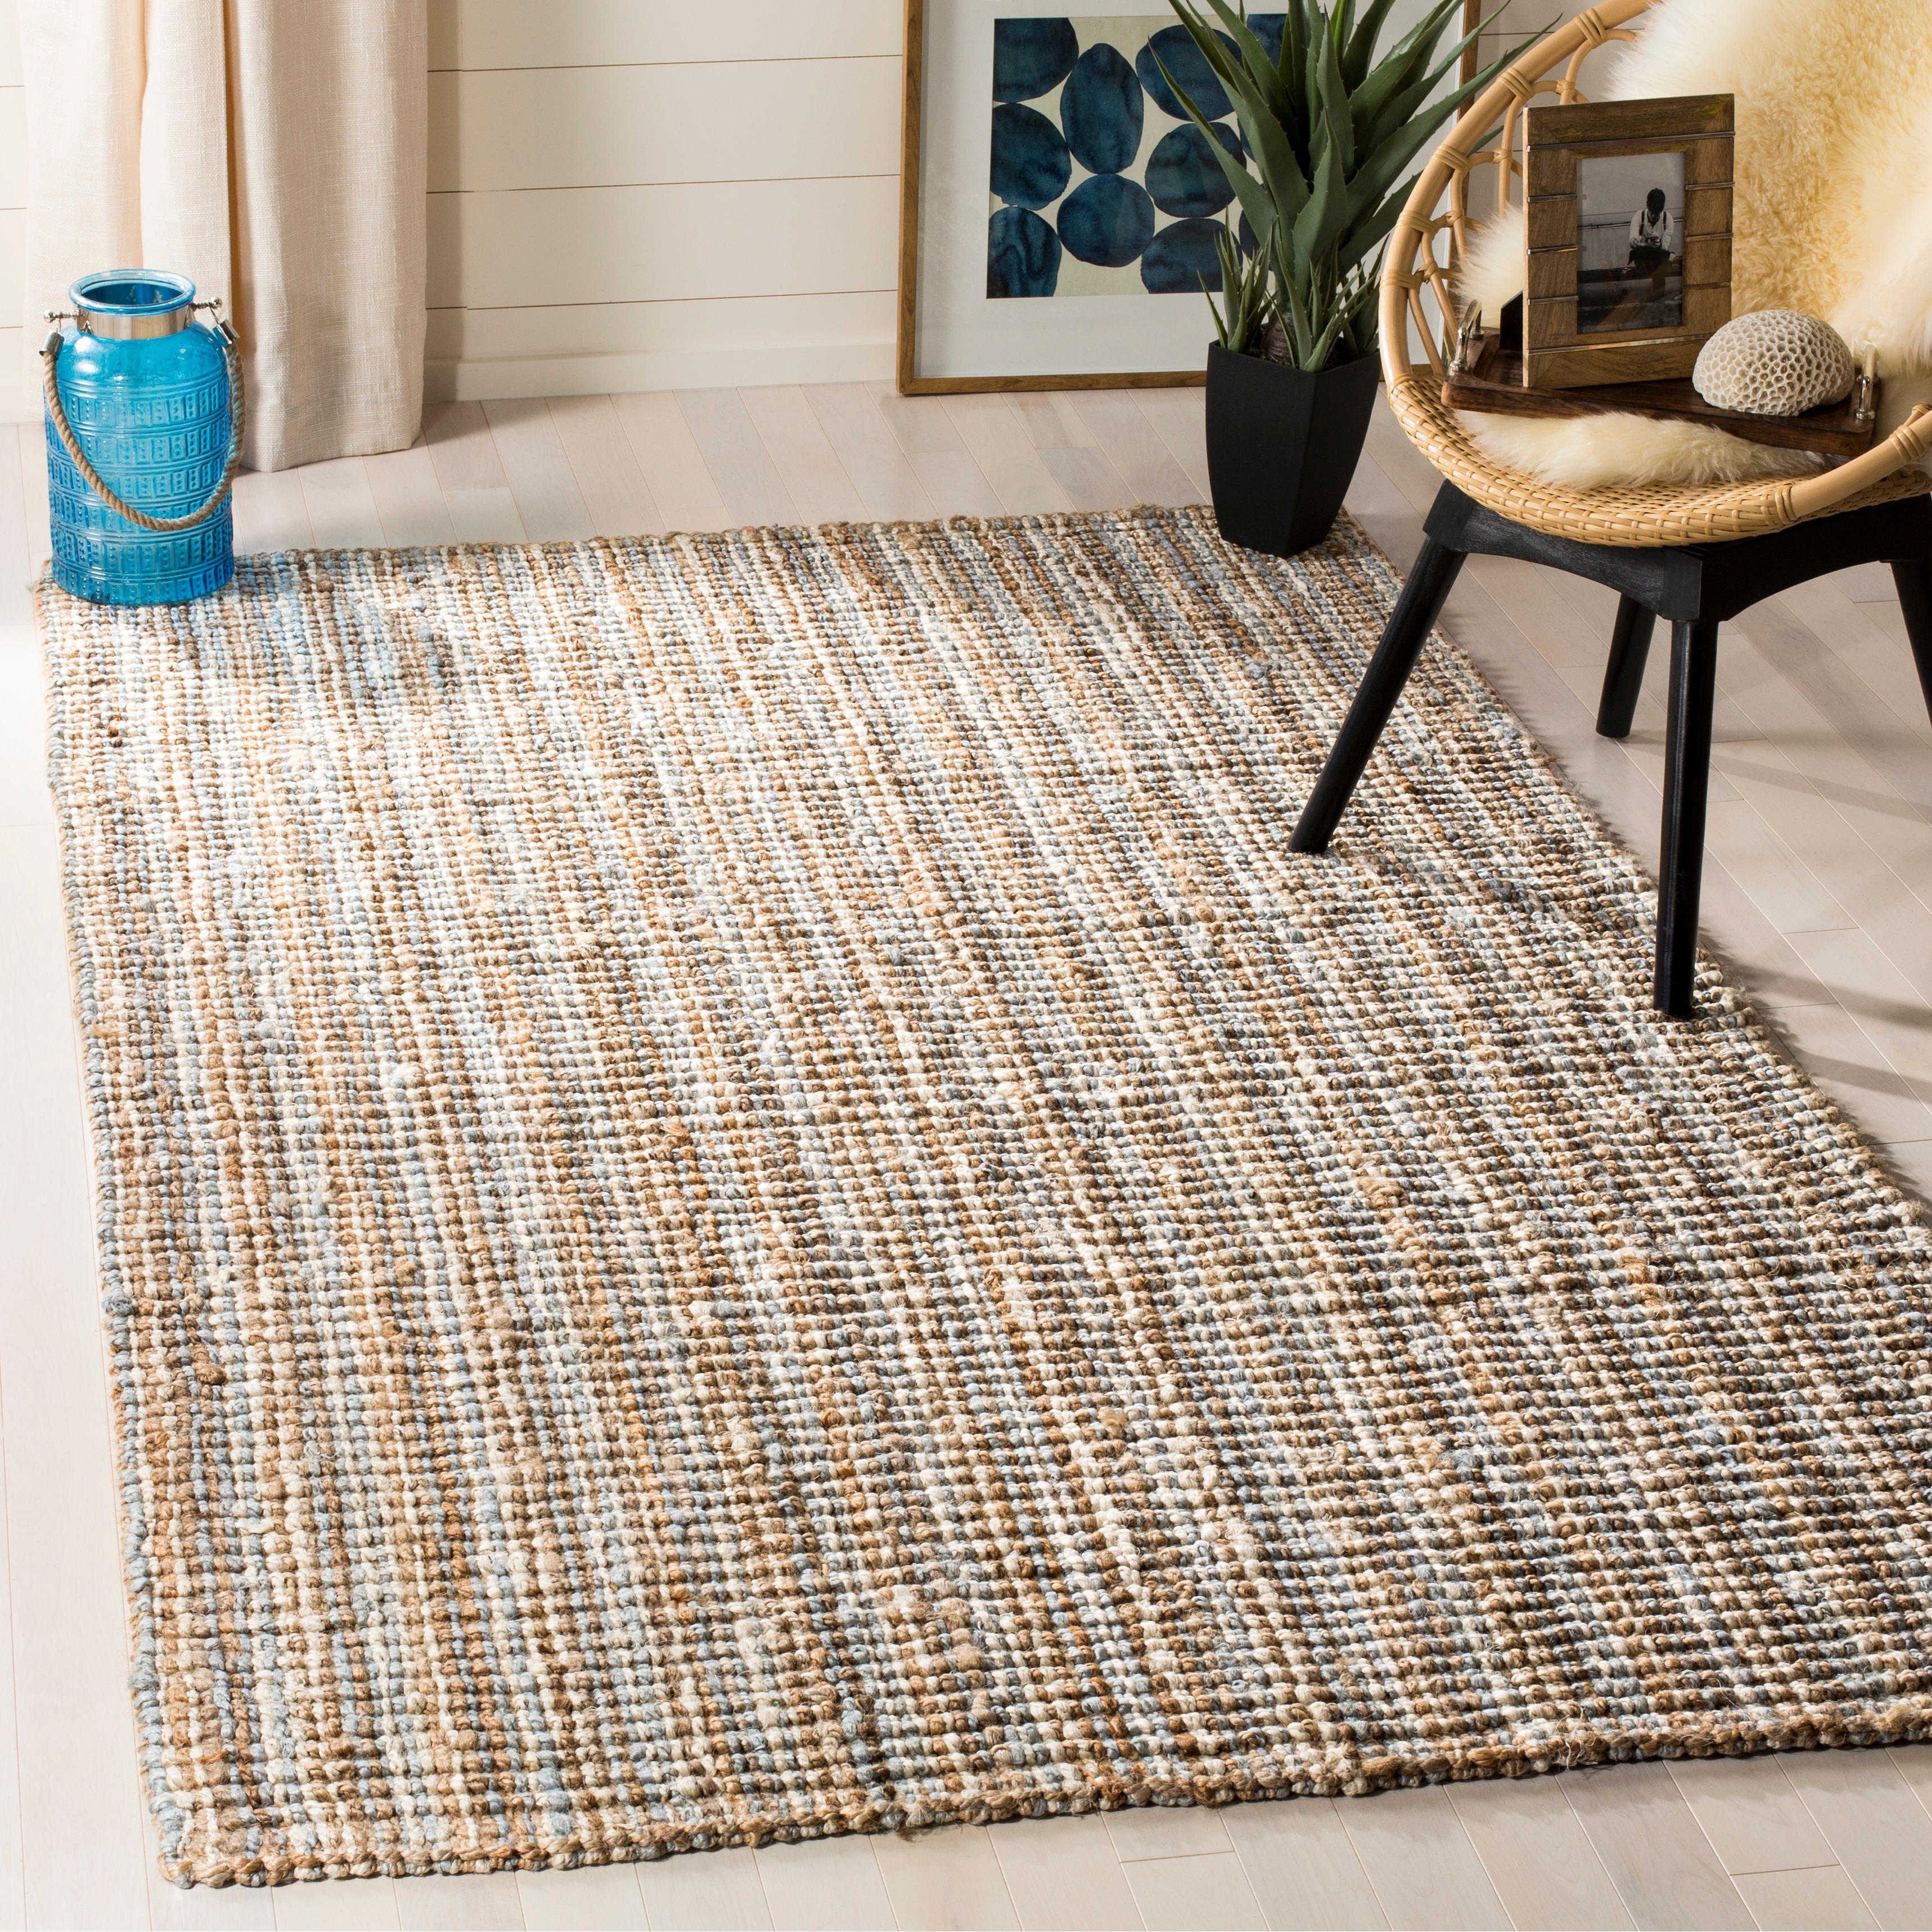 https://ak1.ostkcdn.com/images/products/is/images/direct/d6183eae20f692fc9cfd294f19749ab87c56baae/SAFAVIEH-Jerneja-Handmade-Solid-Chunky-Jute-Area-Rug.jpg